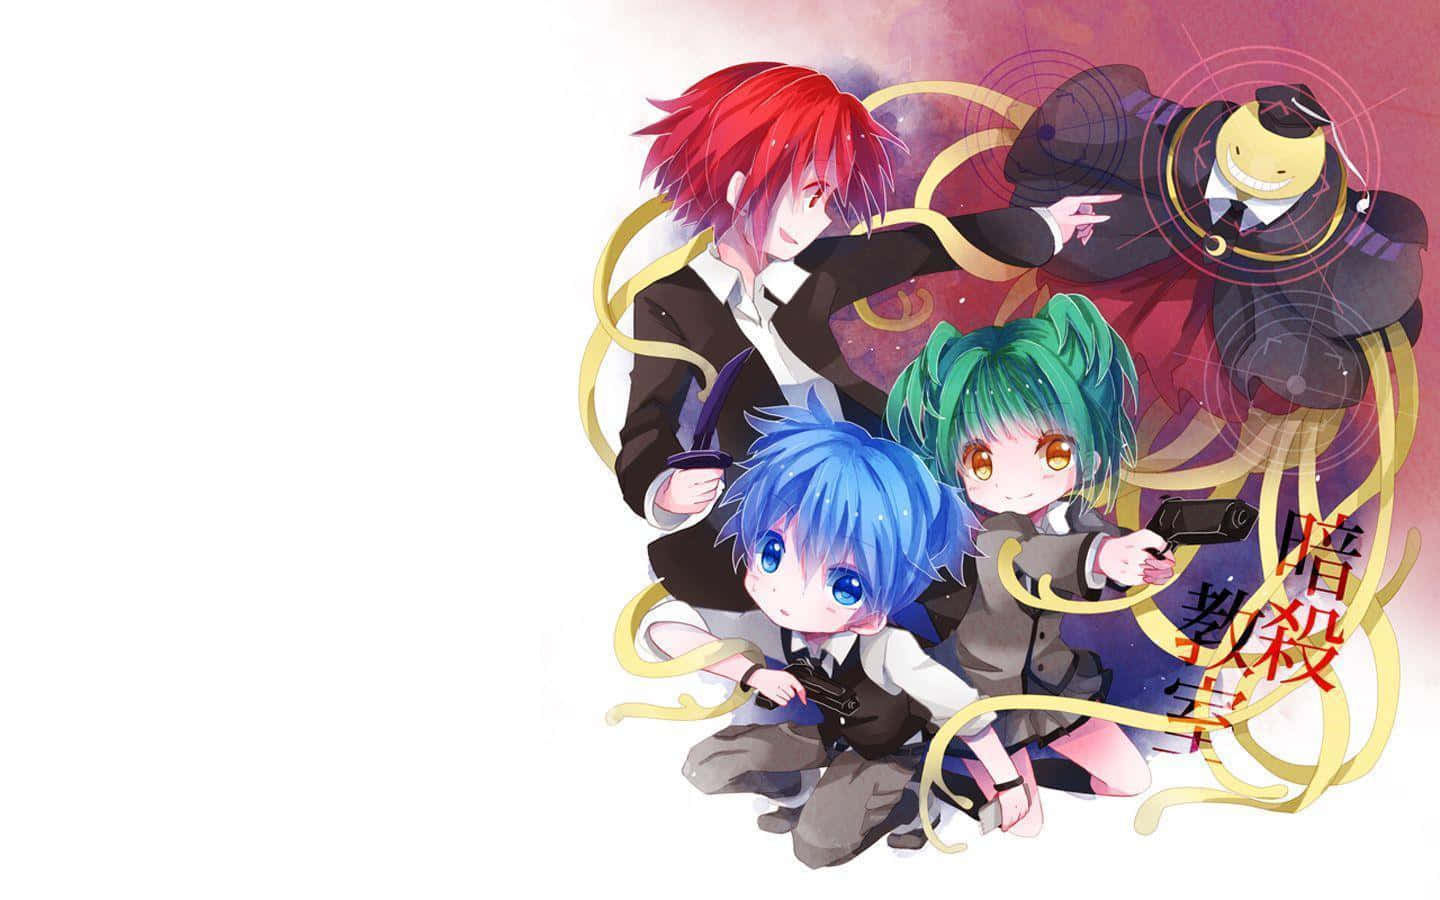 Unified Class of 3-E in their mission to Defeat Koro-sensei